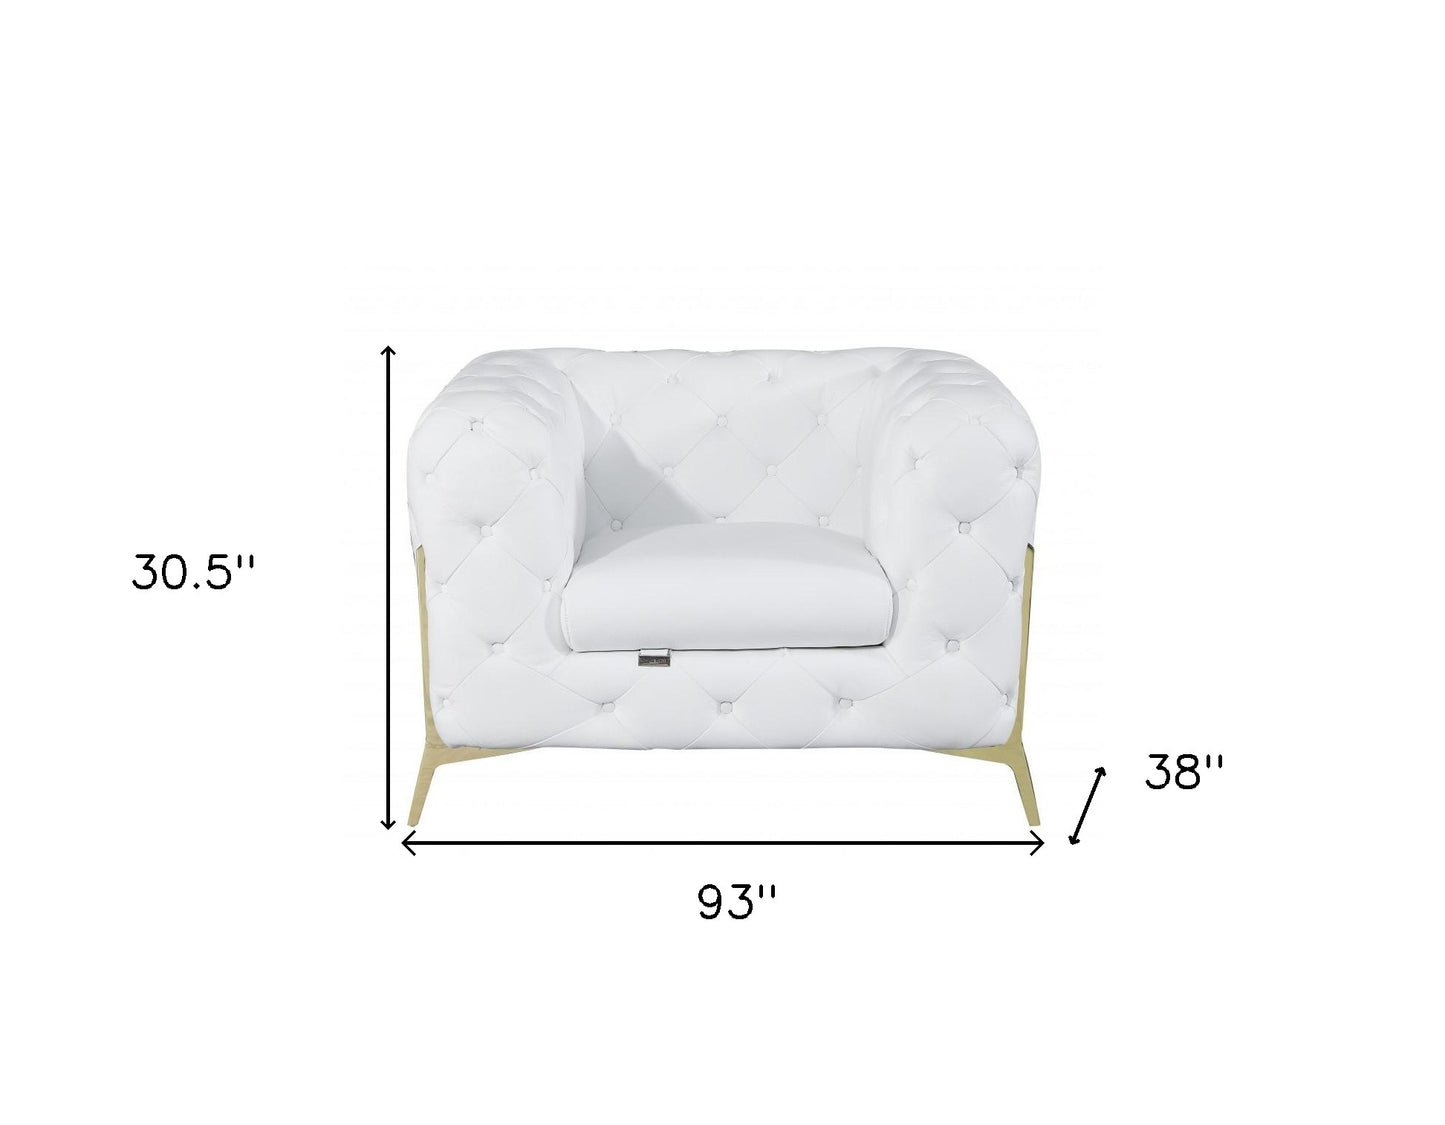 Three Piece Indoor White Italian Leather Five Person Seating Set